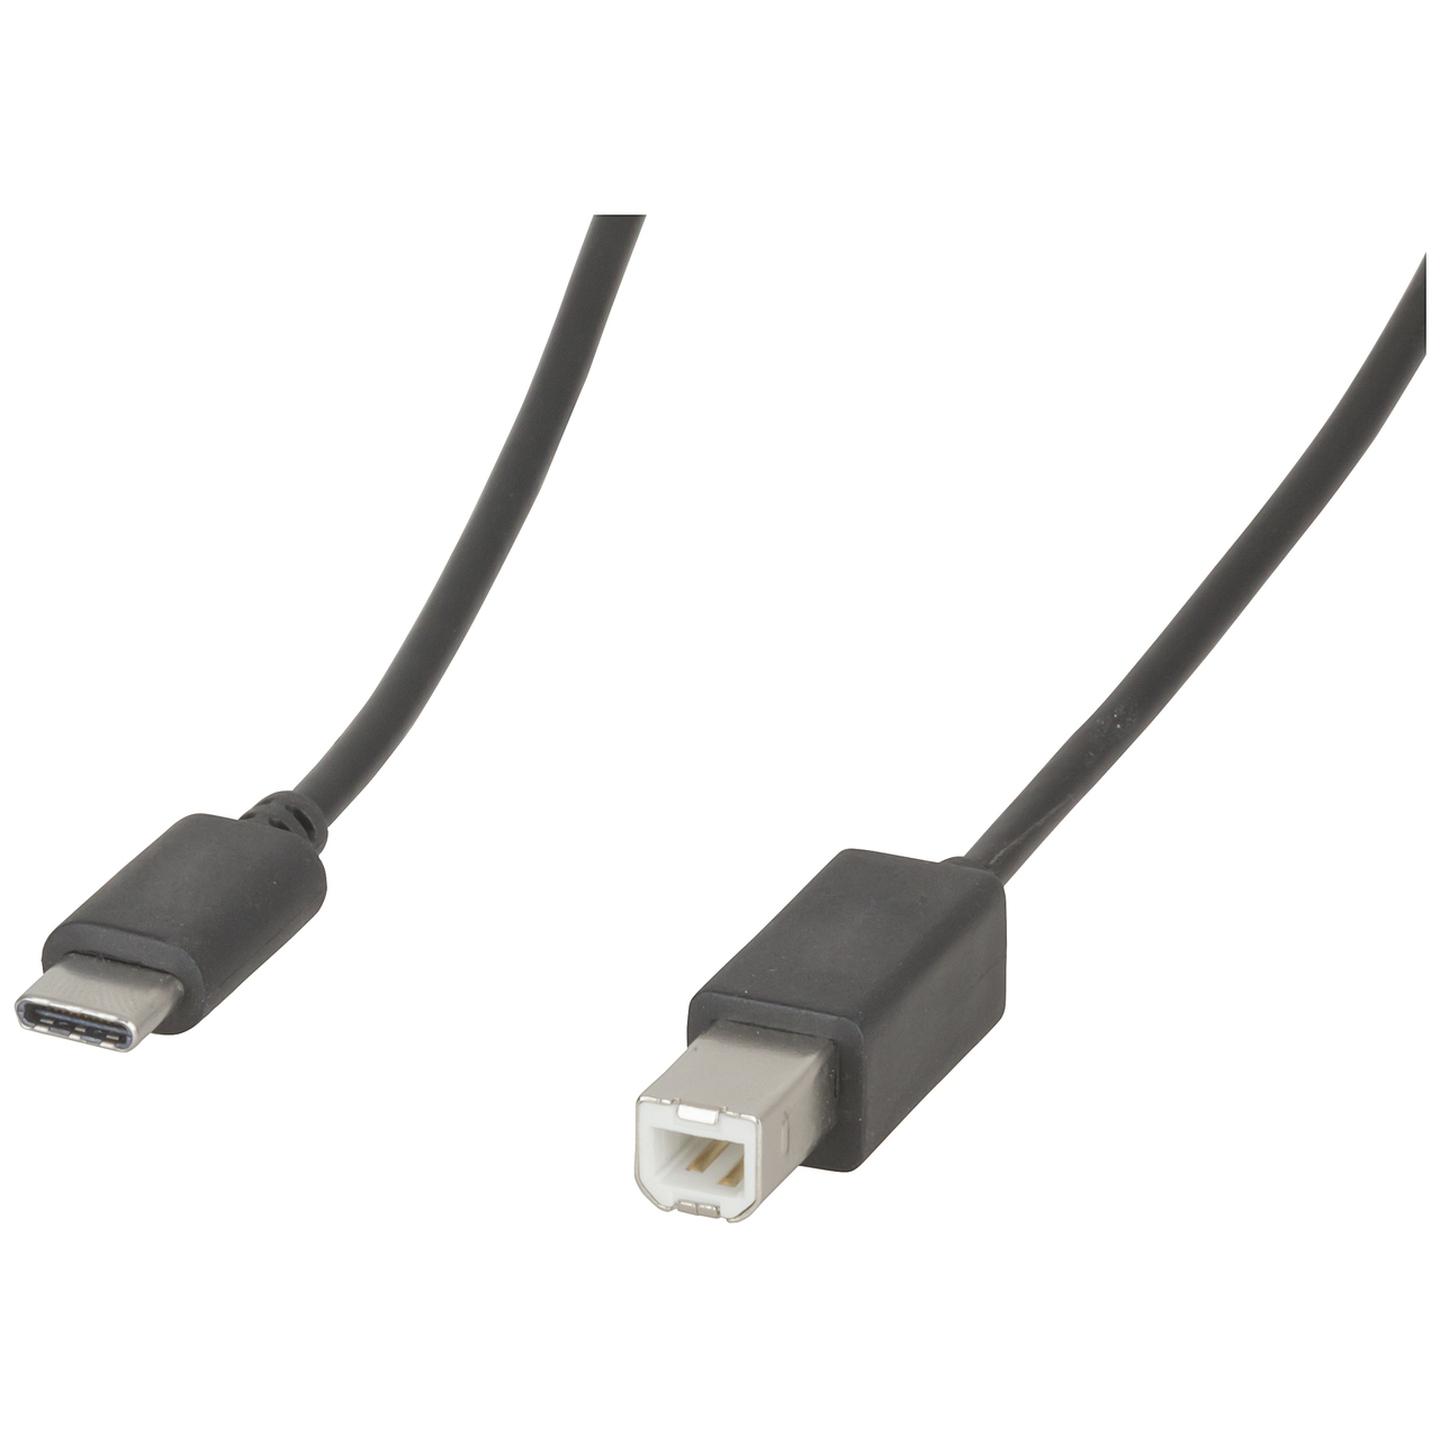 USB Type C to USB 2.0 B Cable 1.8m